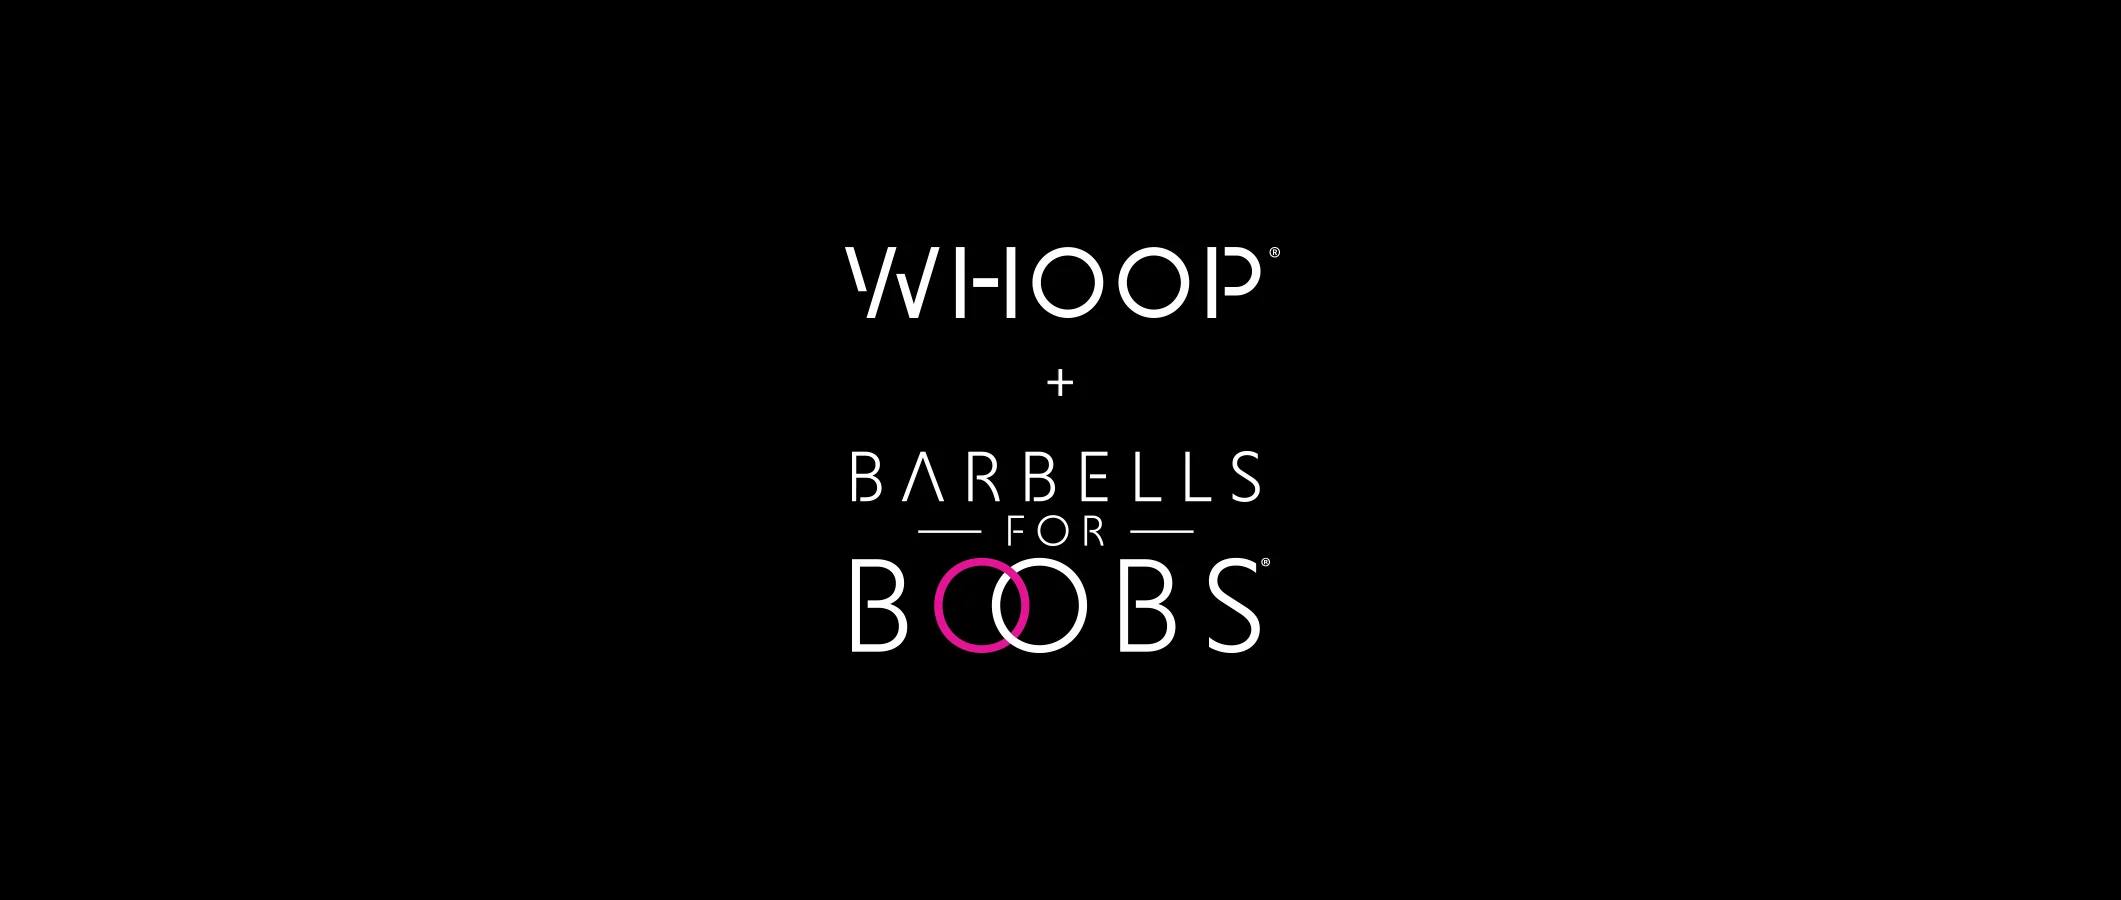 WHOOP Partners with Barbells for Boobs to Further Breast Cancer Research